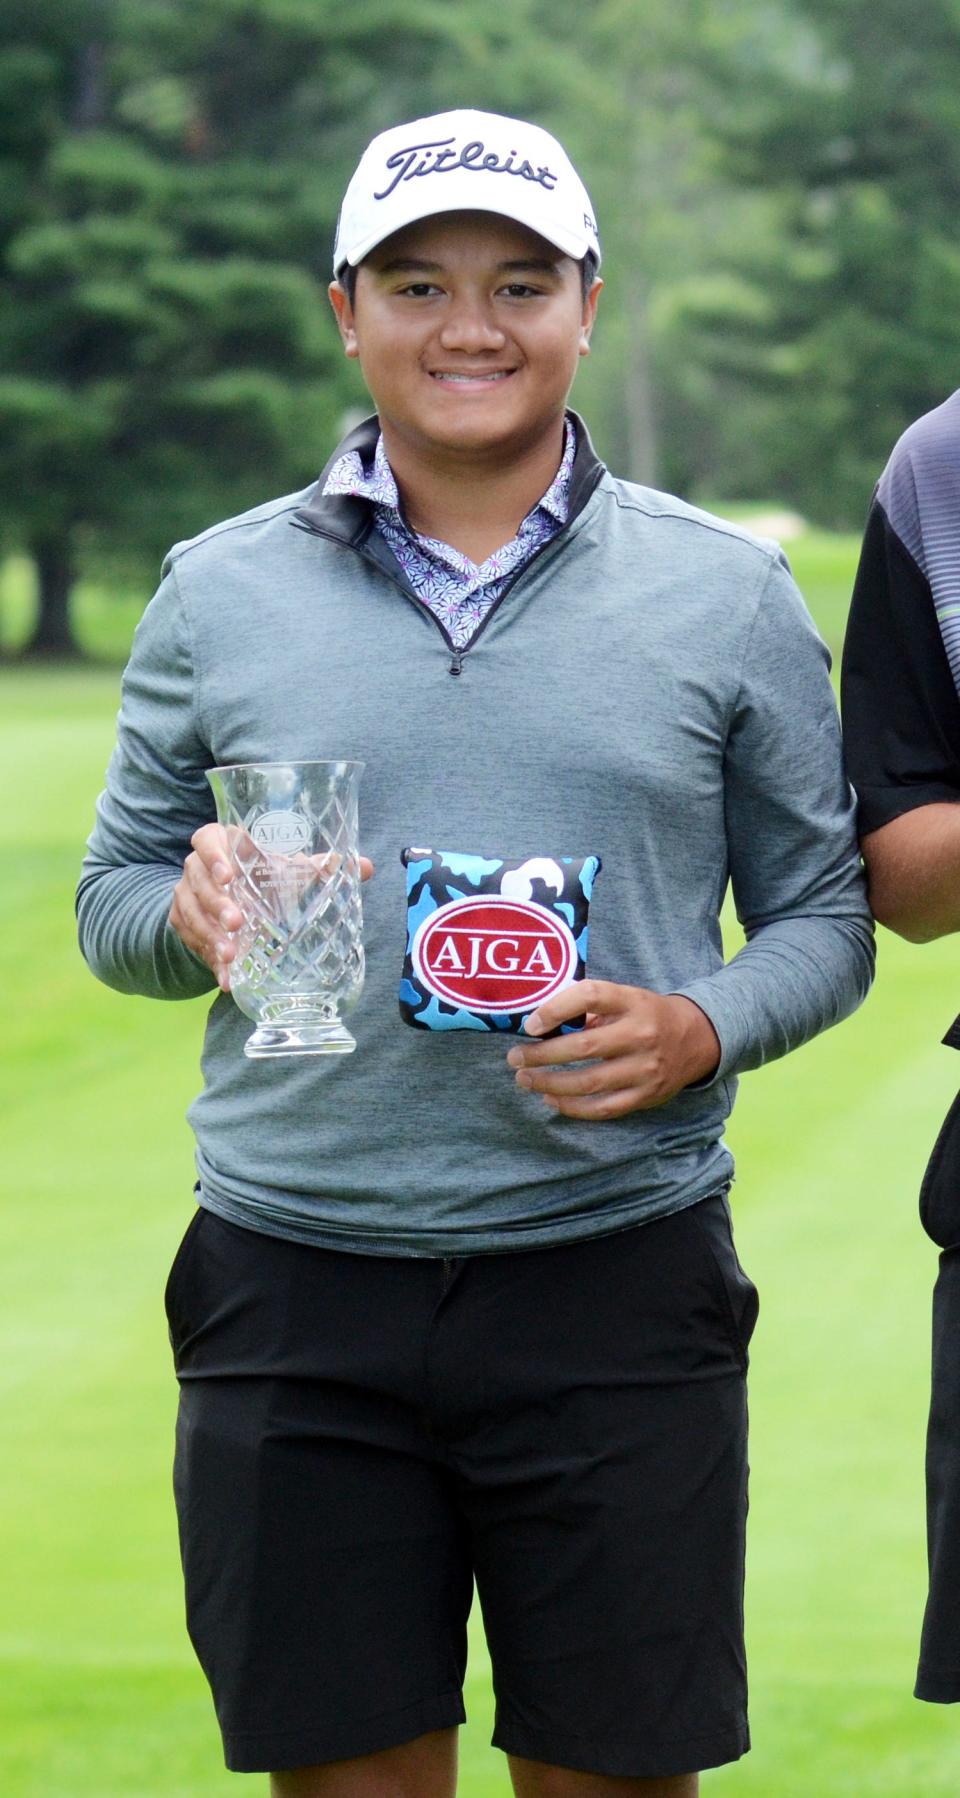 Lorenzo Pinili of Rochester Hills will be back as the top placing competitor within the Coca-Cola Junior Championships field next week after a fourth place finish a year ago.